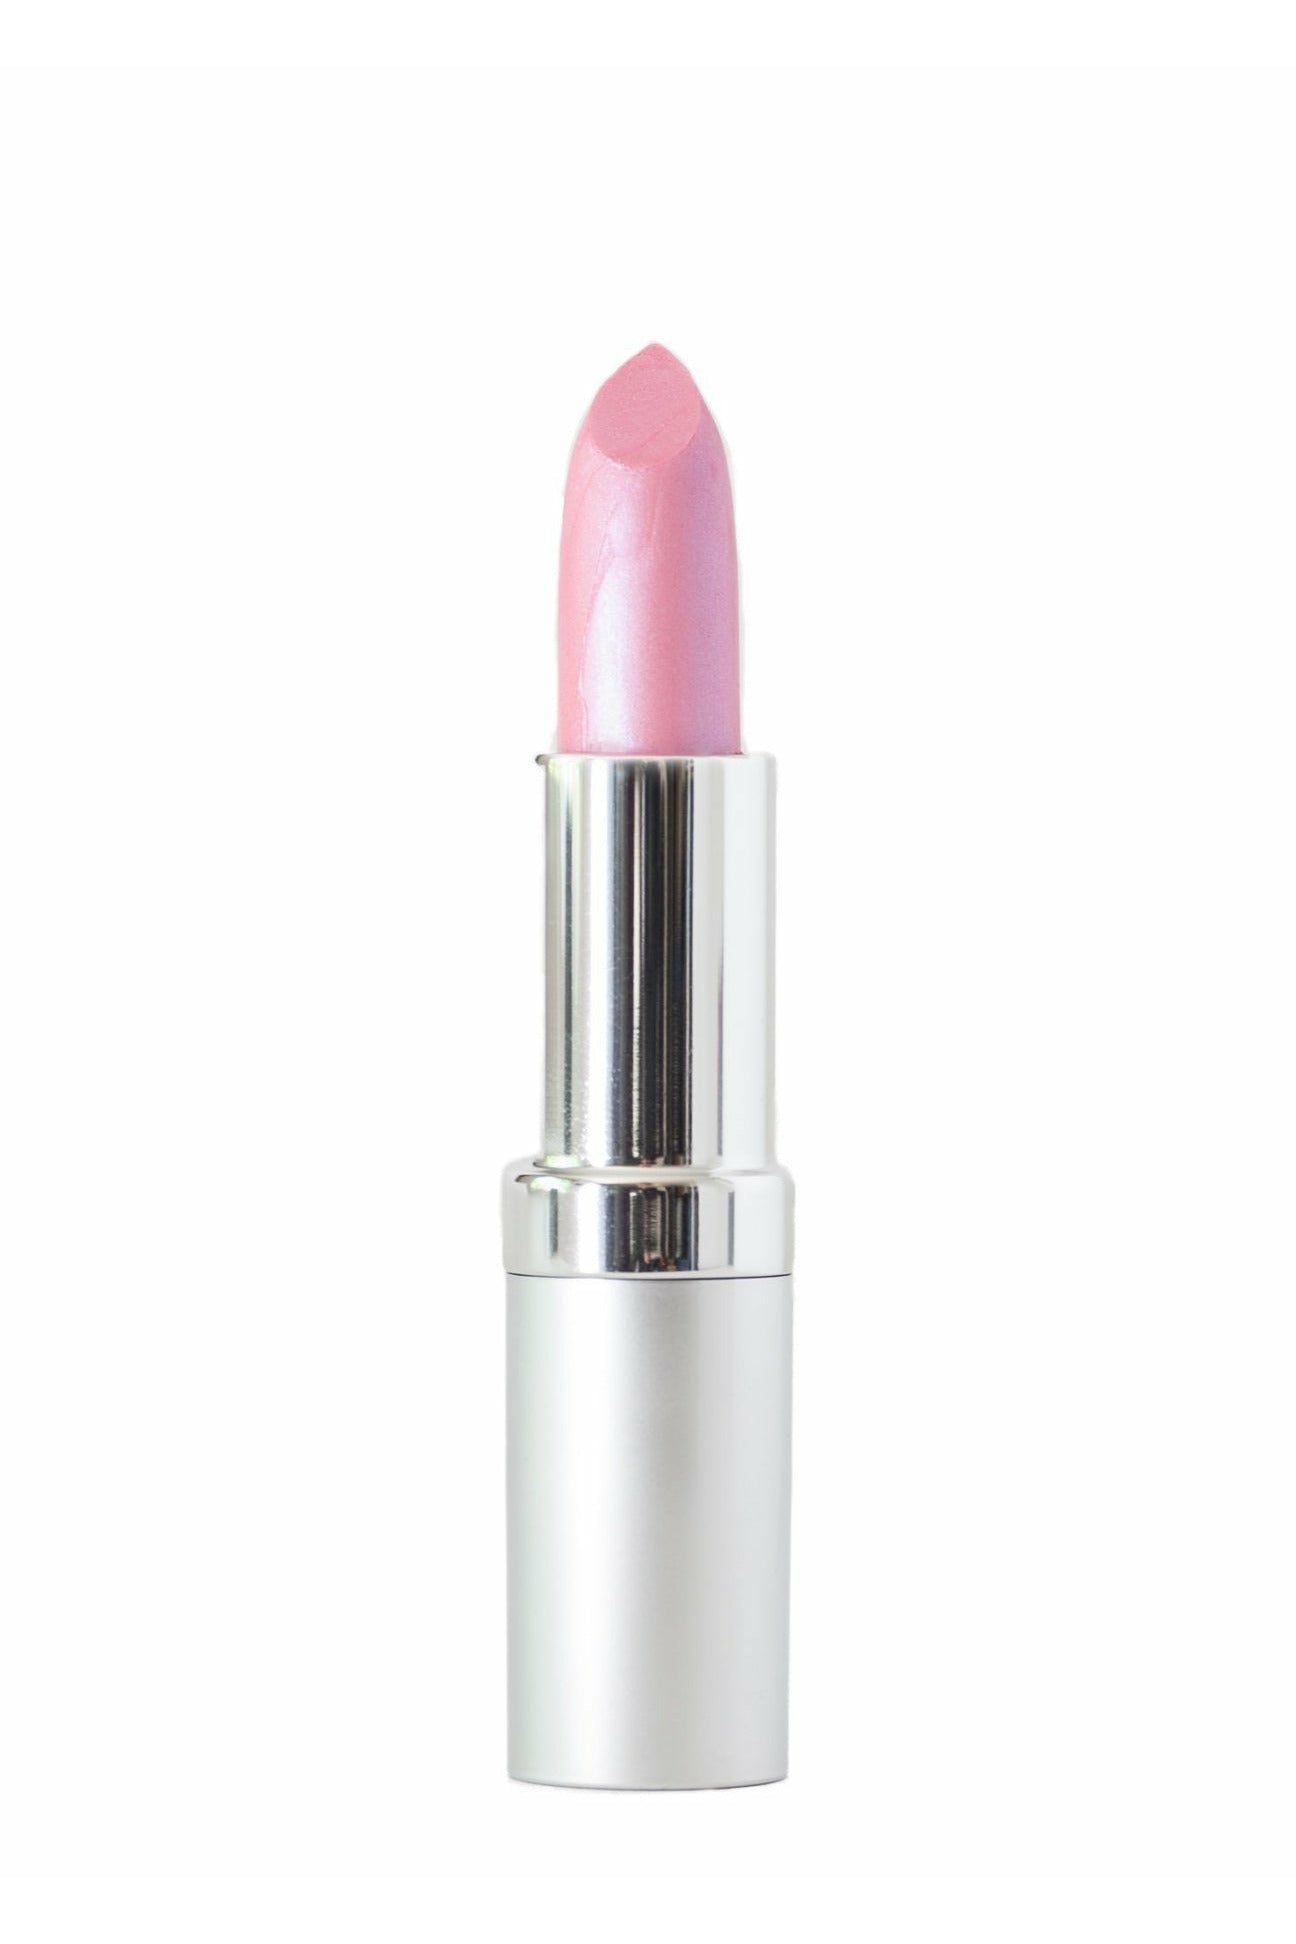 REB Cosmetics Lipstick in Stand Out Pink